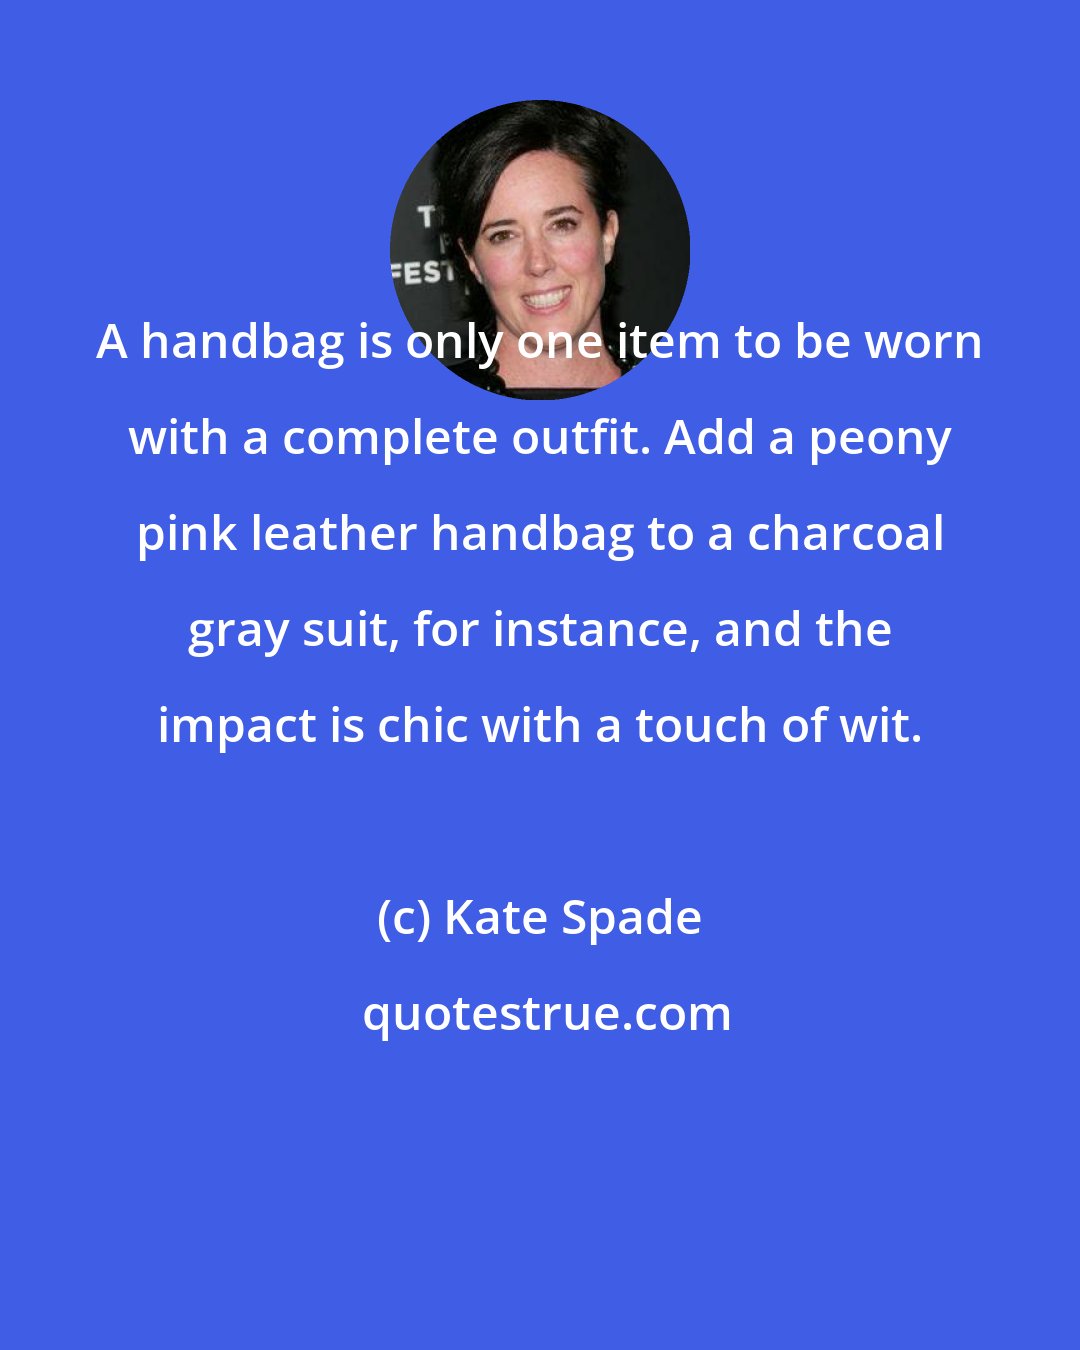 Kate Spade: A handbag is only one item to be worn with a complete outfit. Add a peony pink leather handbag to a charcoal gray suit, for instance, and the impact is chic with a touch of wit.